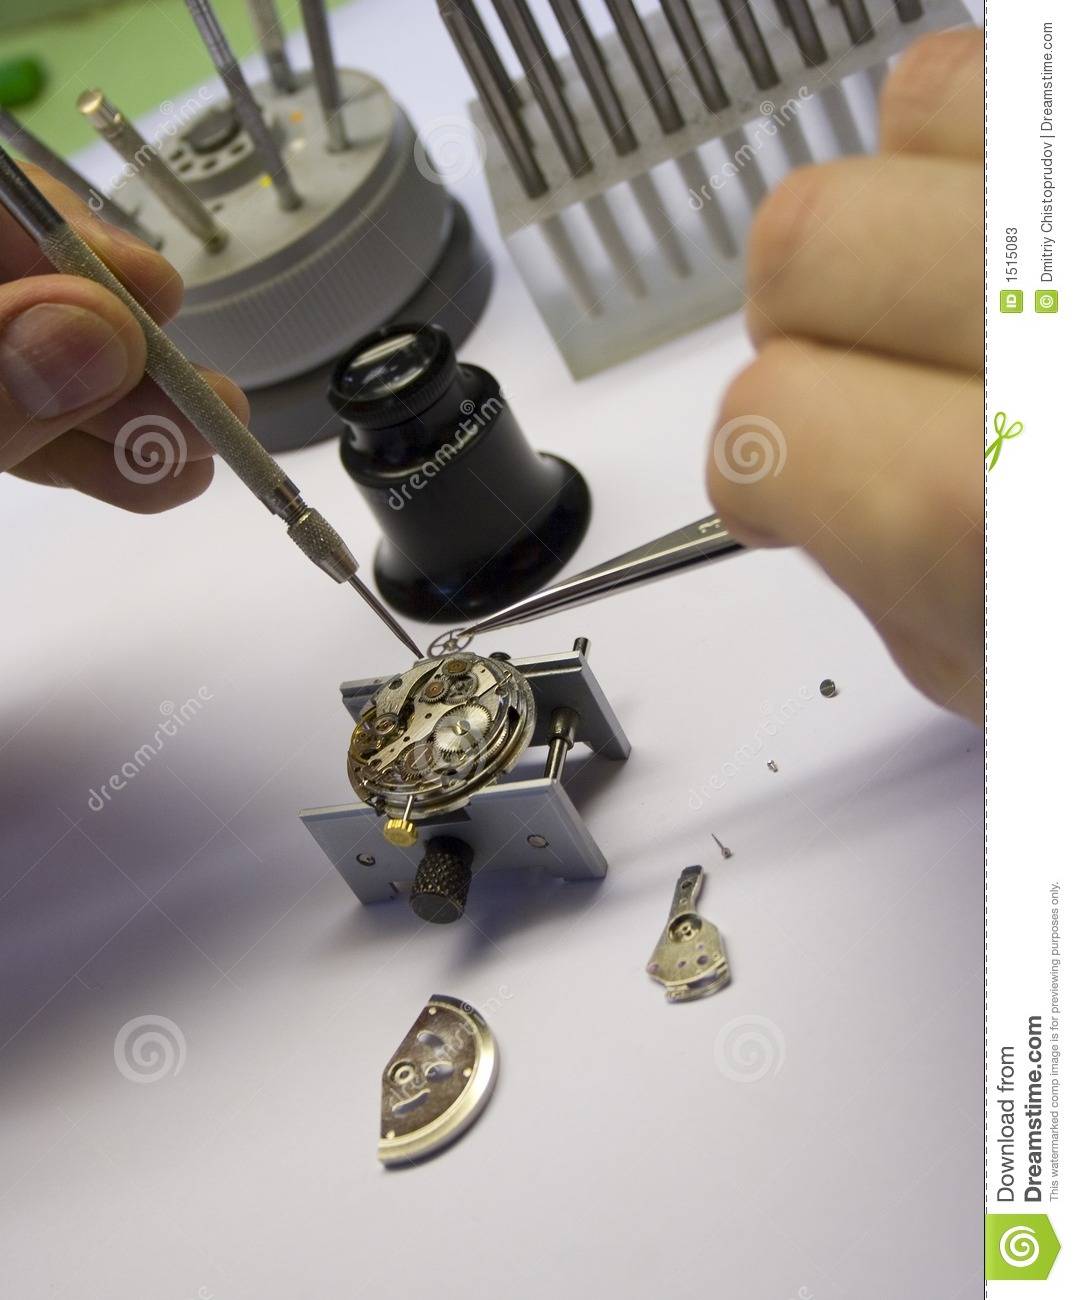 Inside Of A Watch  Repair  Focus On Watch Parts